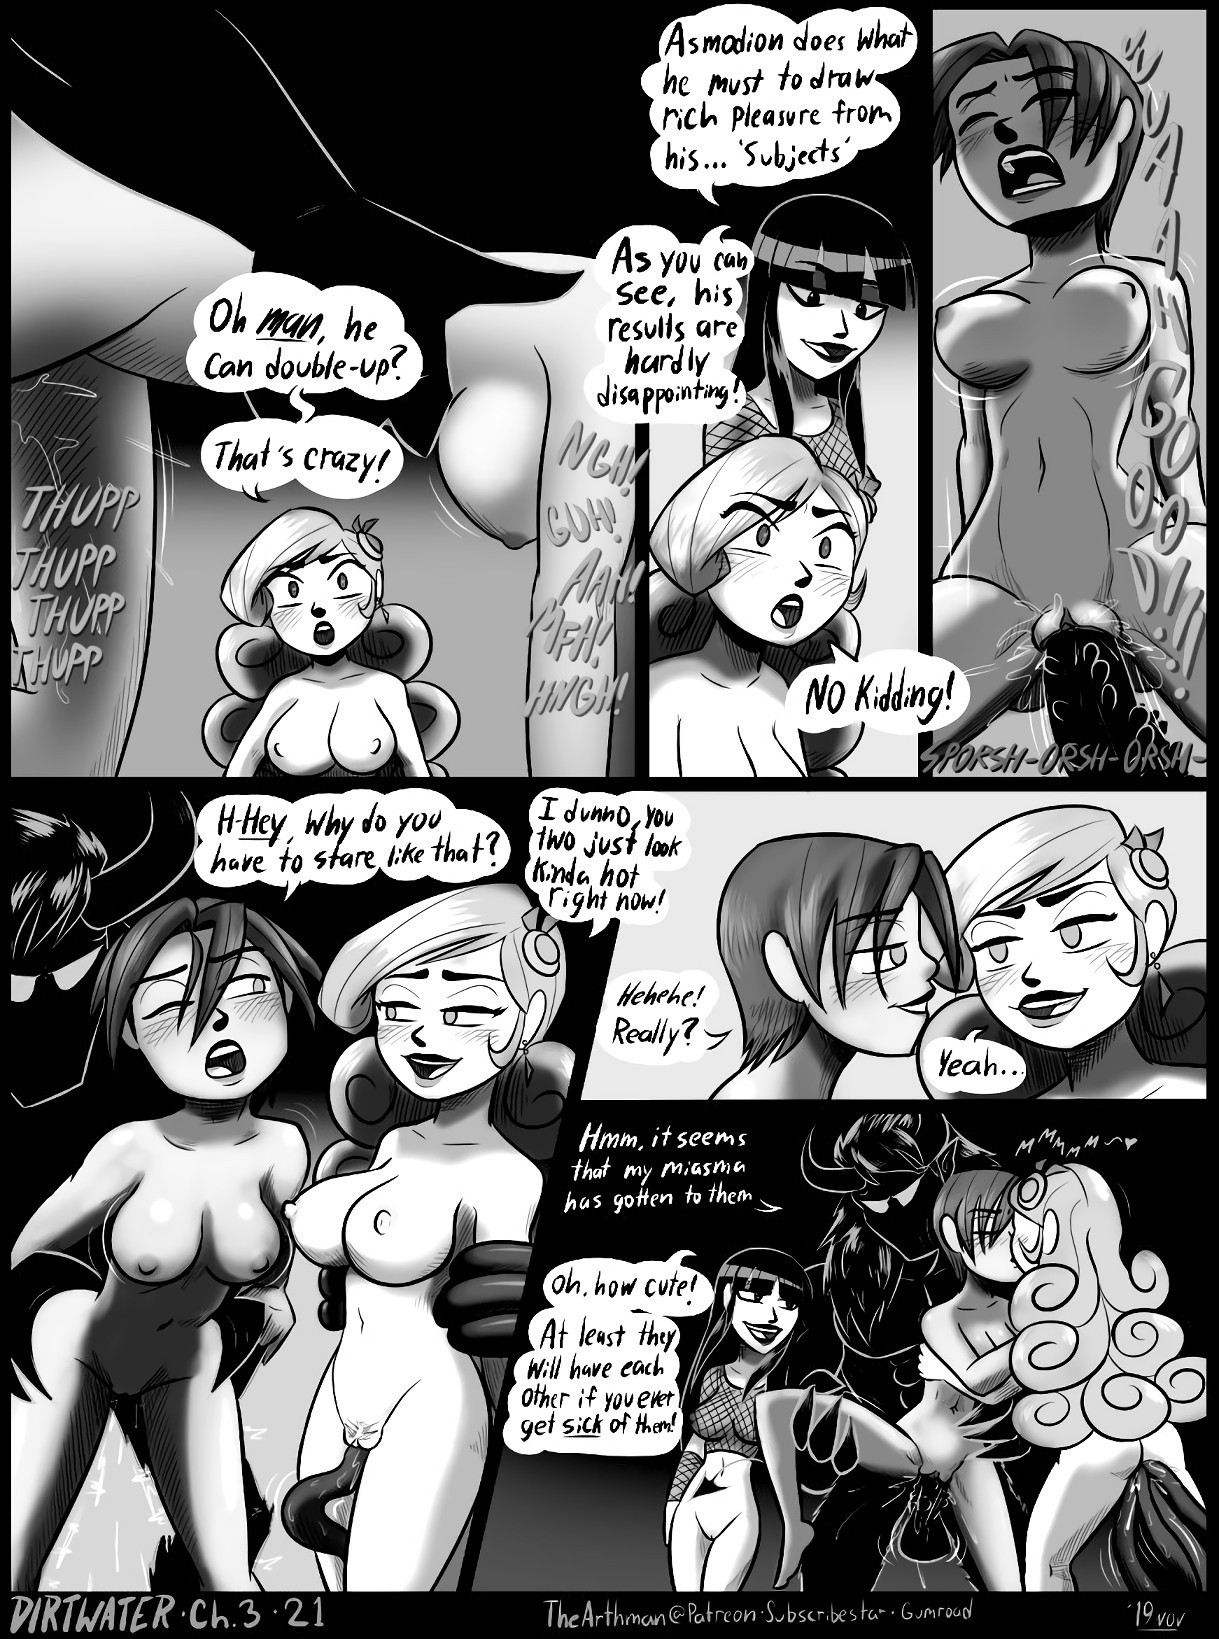 Dirtwater 3 - Dark Chambers porn comic picture 22